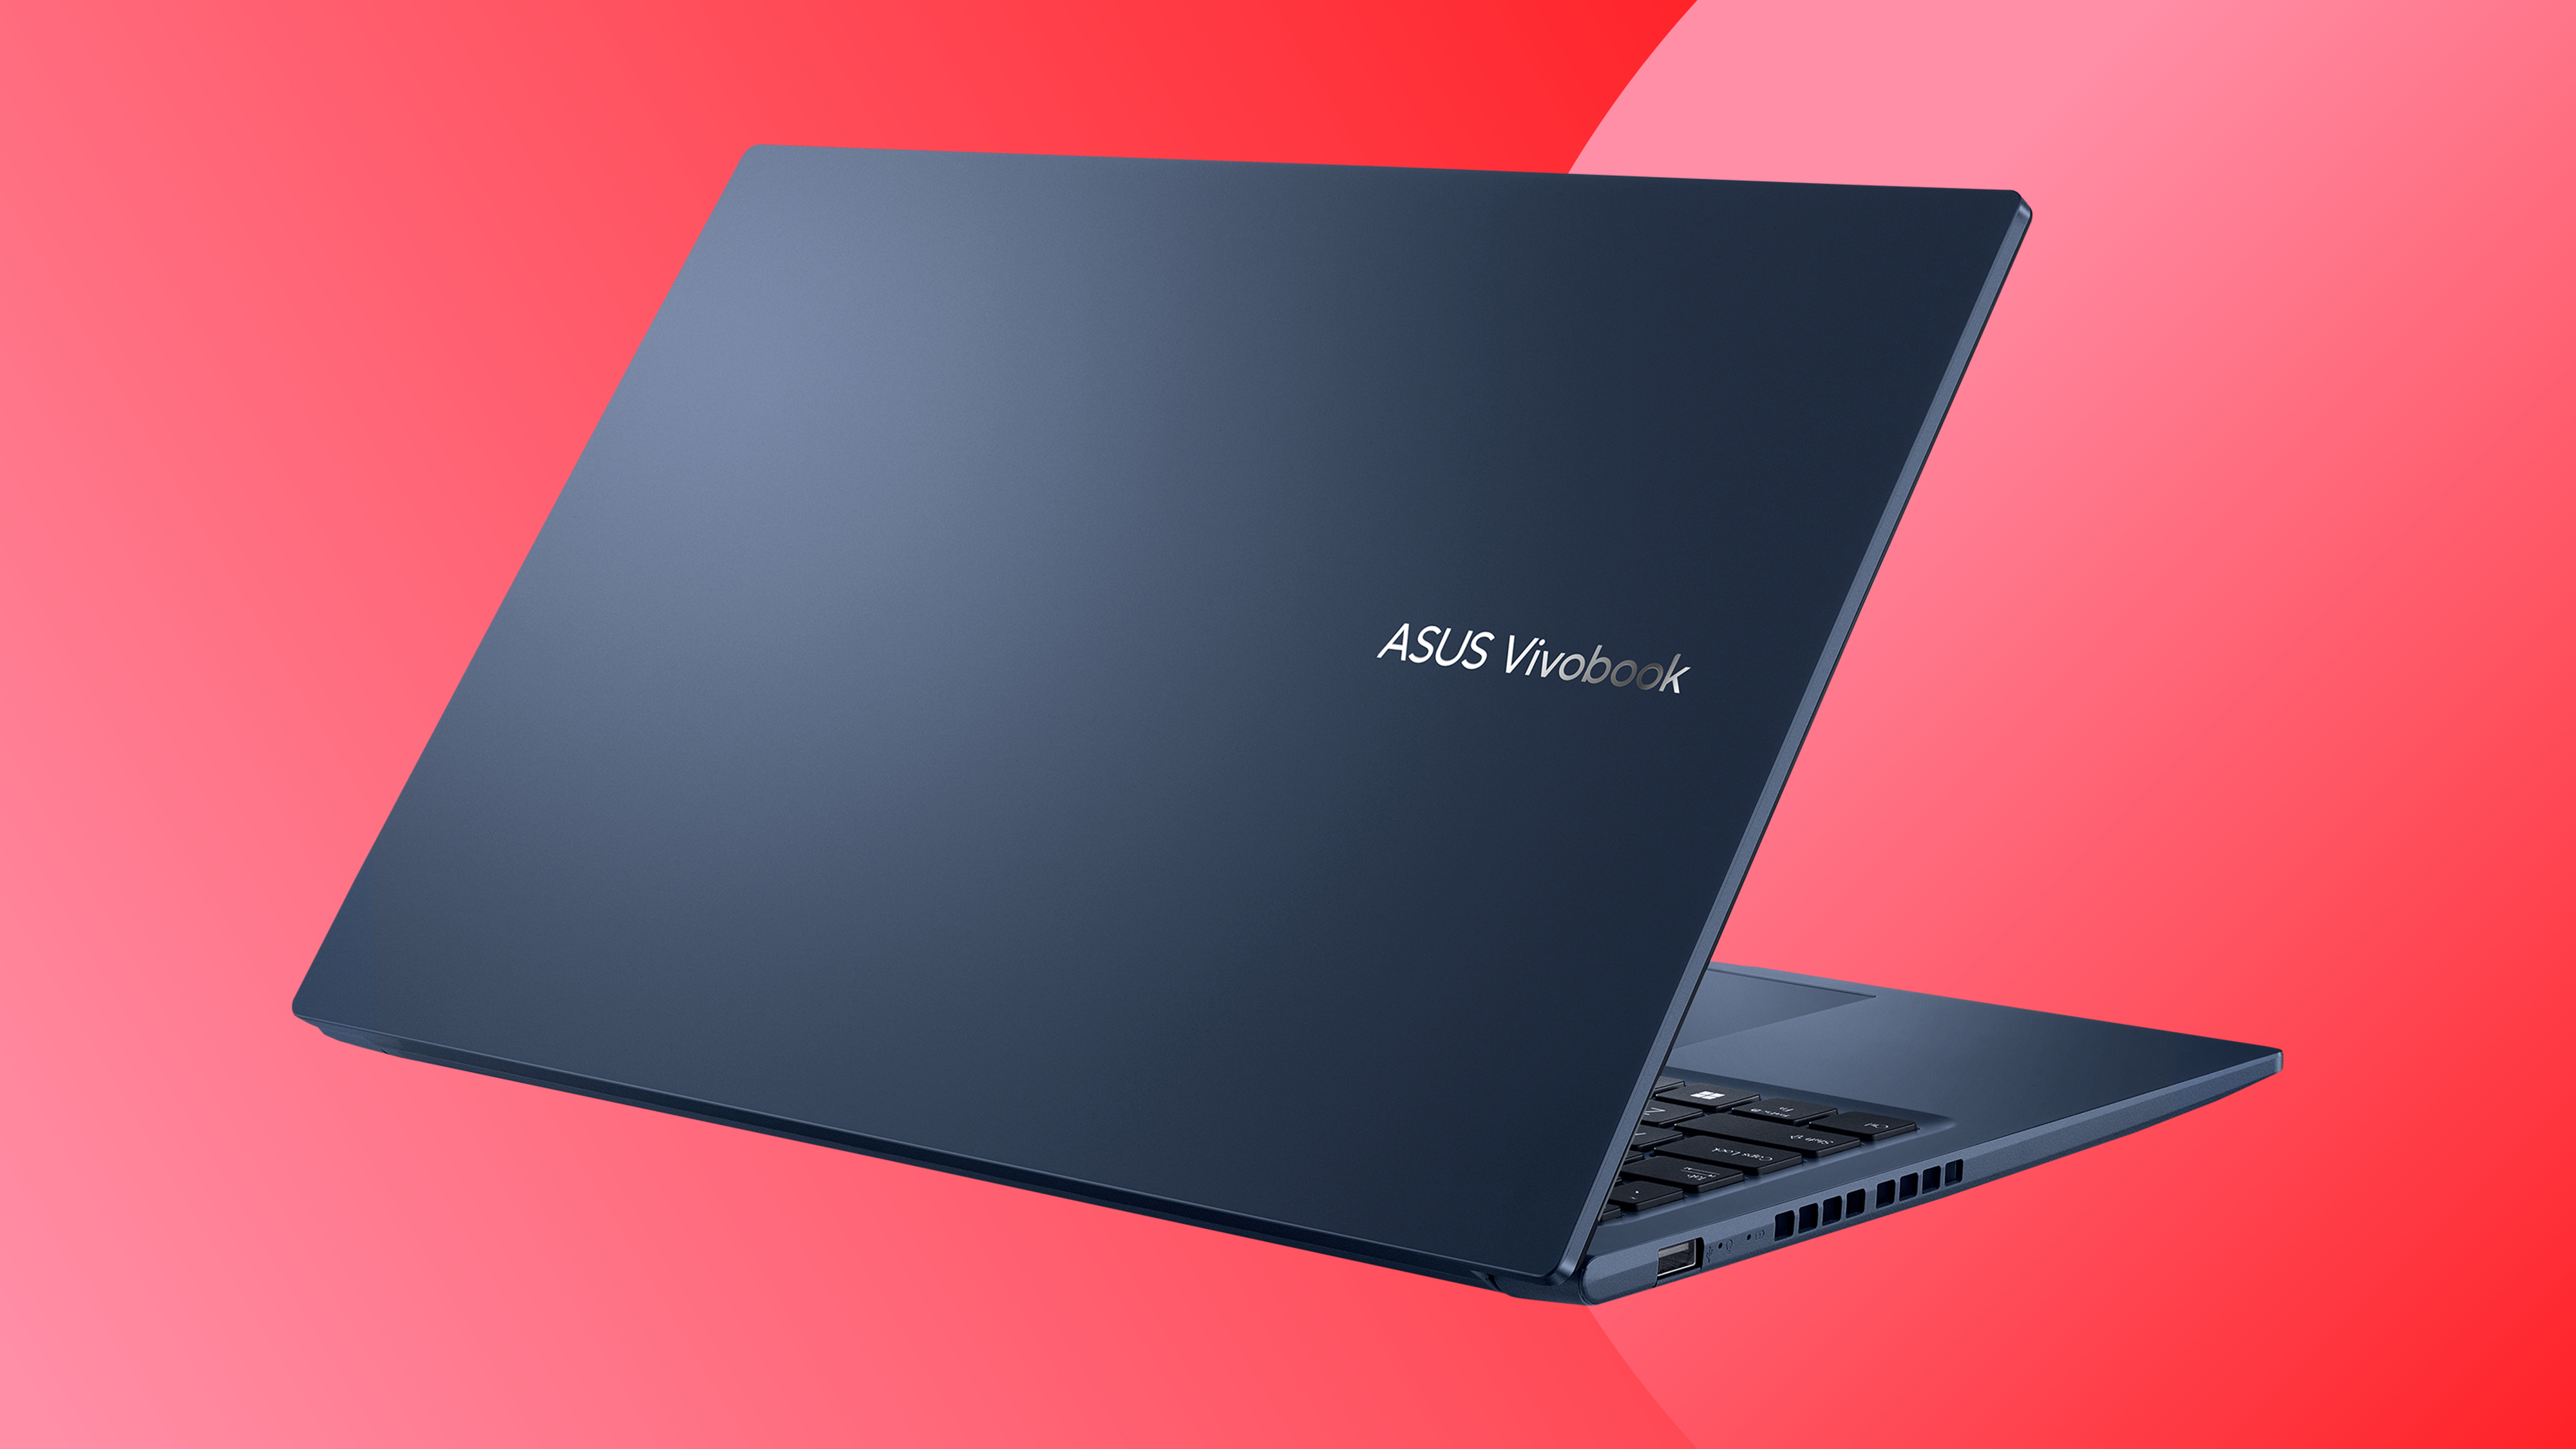 An ASUS Black Friday deals image with an ASUS Vivobook 15 on a red background